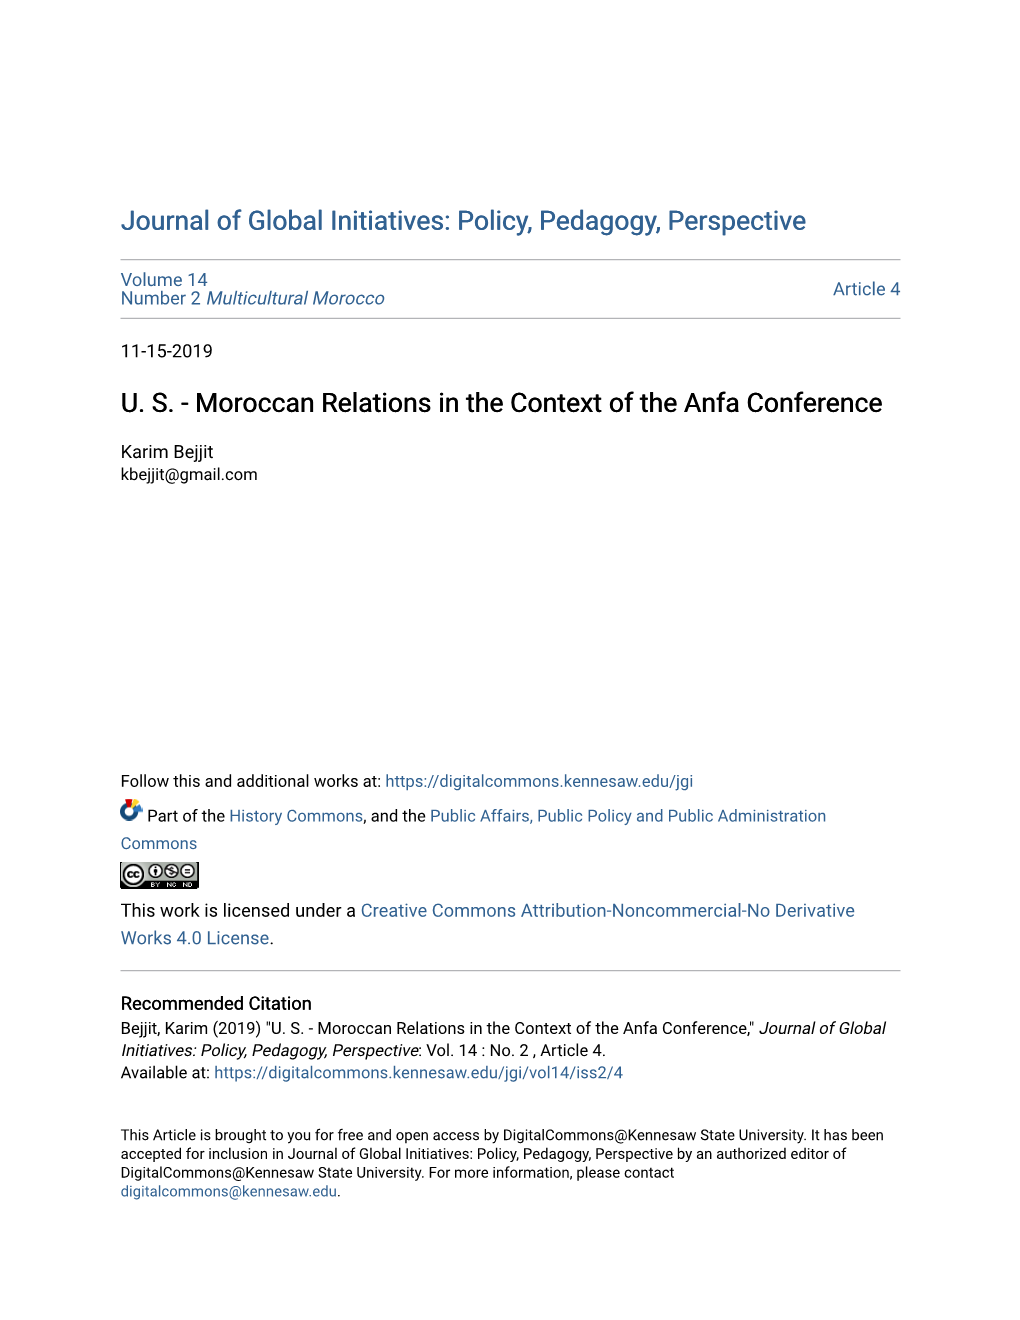 U. S. - Moroccan Relations in the Context of the Anfa Conference